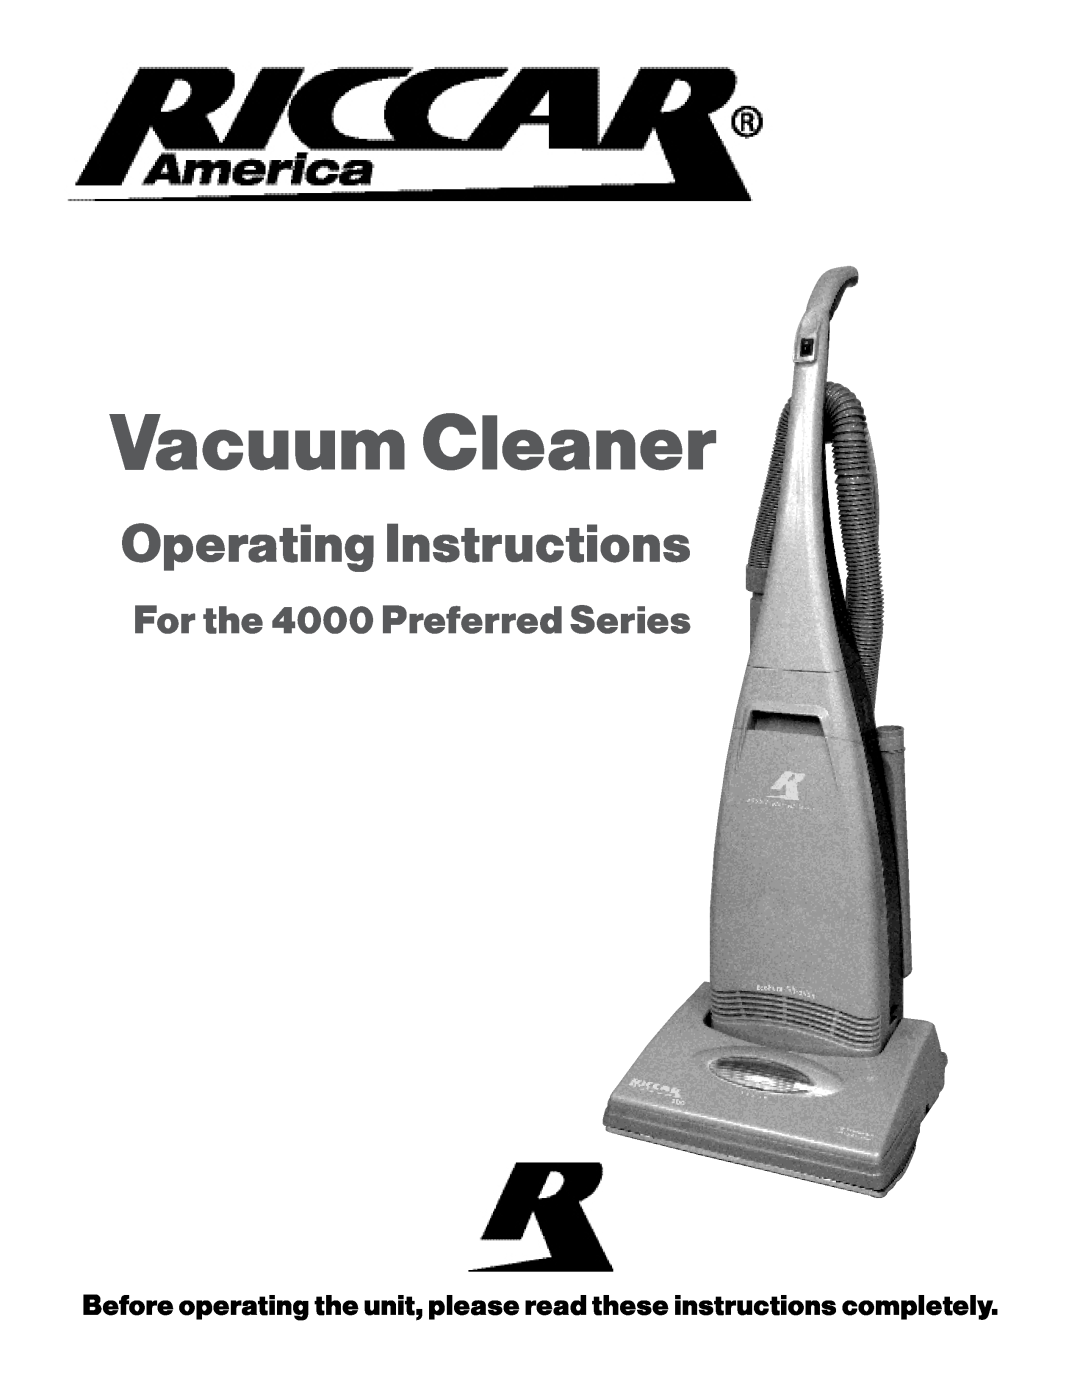 Riccar manual Vacuum Cleaner, Operating Instructions, For the 4000 Preferred Series 